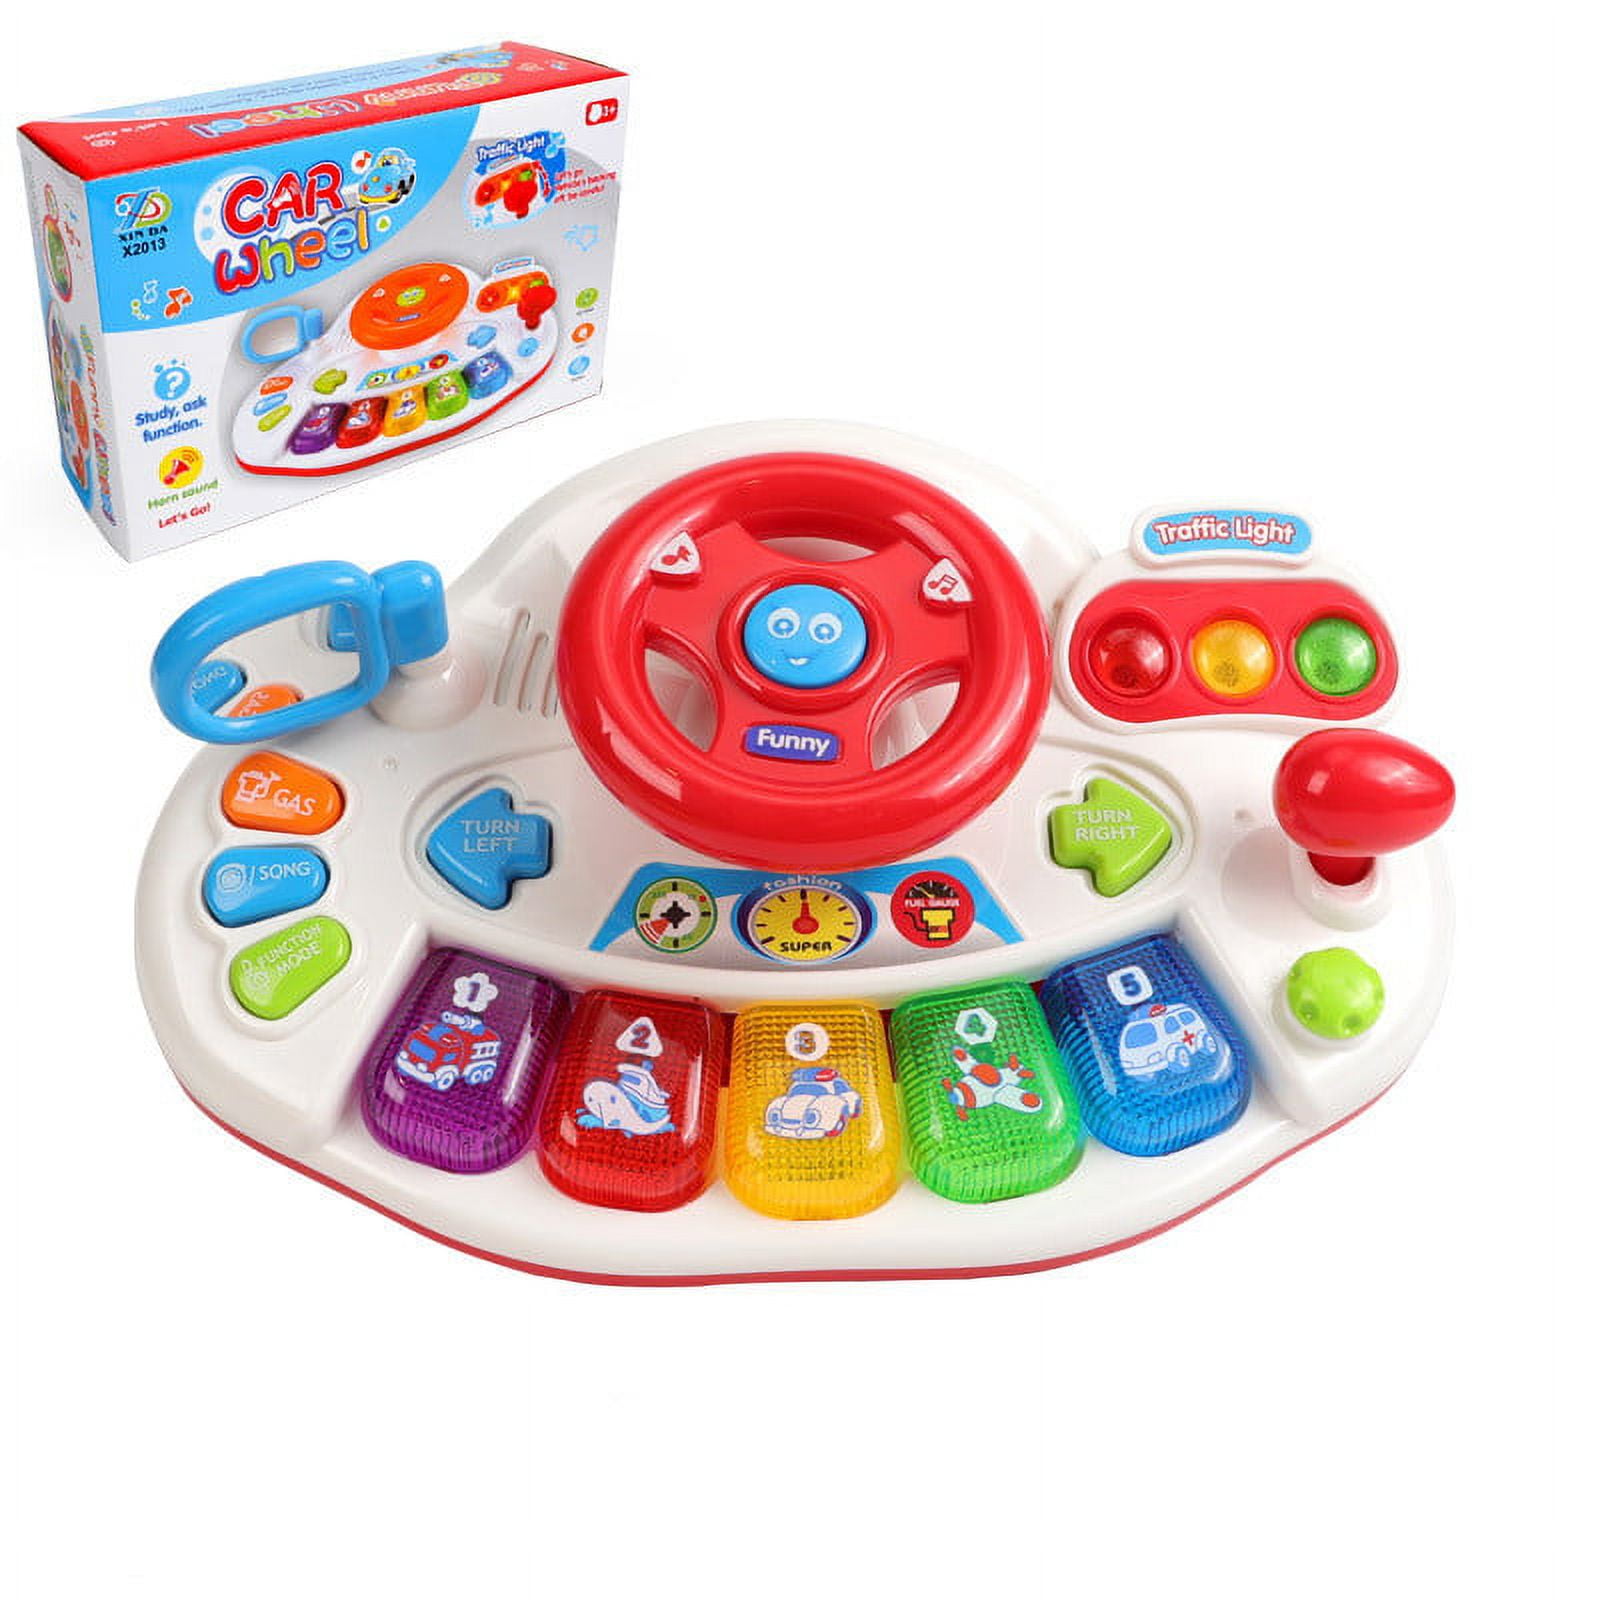 Baby Musical Toy 1 2 Year Old Boys Girls Light Up Steering Wheel Traffic Sound 6 8 9 10 Months Infant Learning Development Toys 3 6 6 12 12 18 Gifts 2fa23903 e52e 434b 9eb2 ad21c43e3611.d3c549c20fde82fac71efb996d6209f8